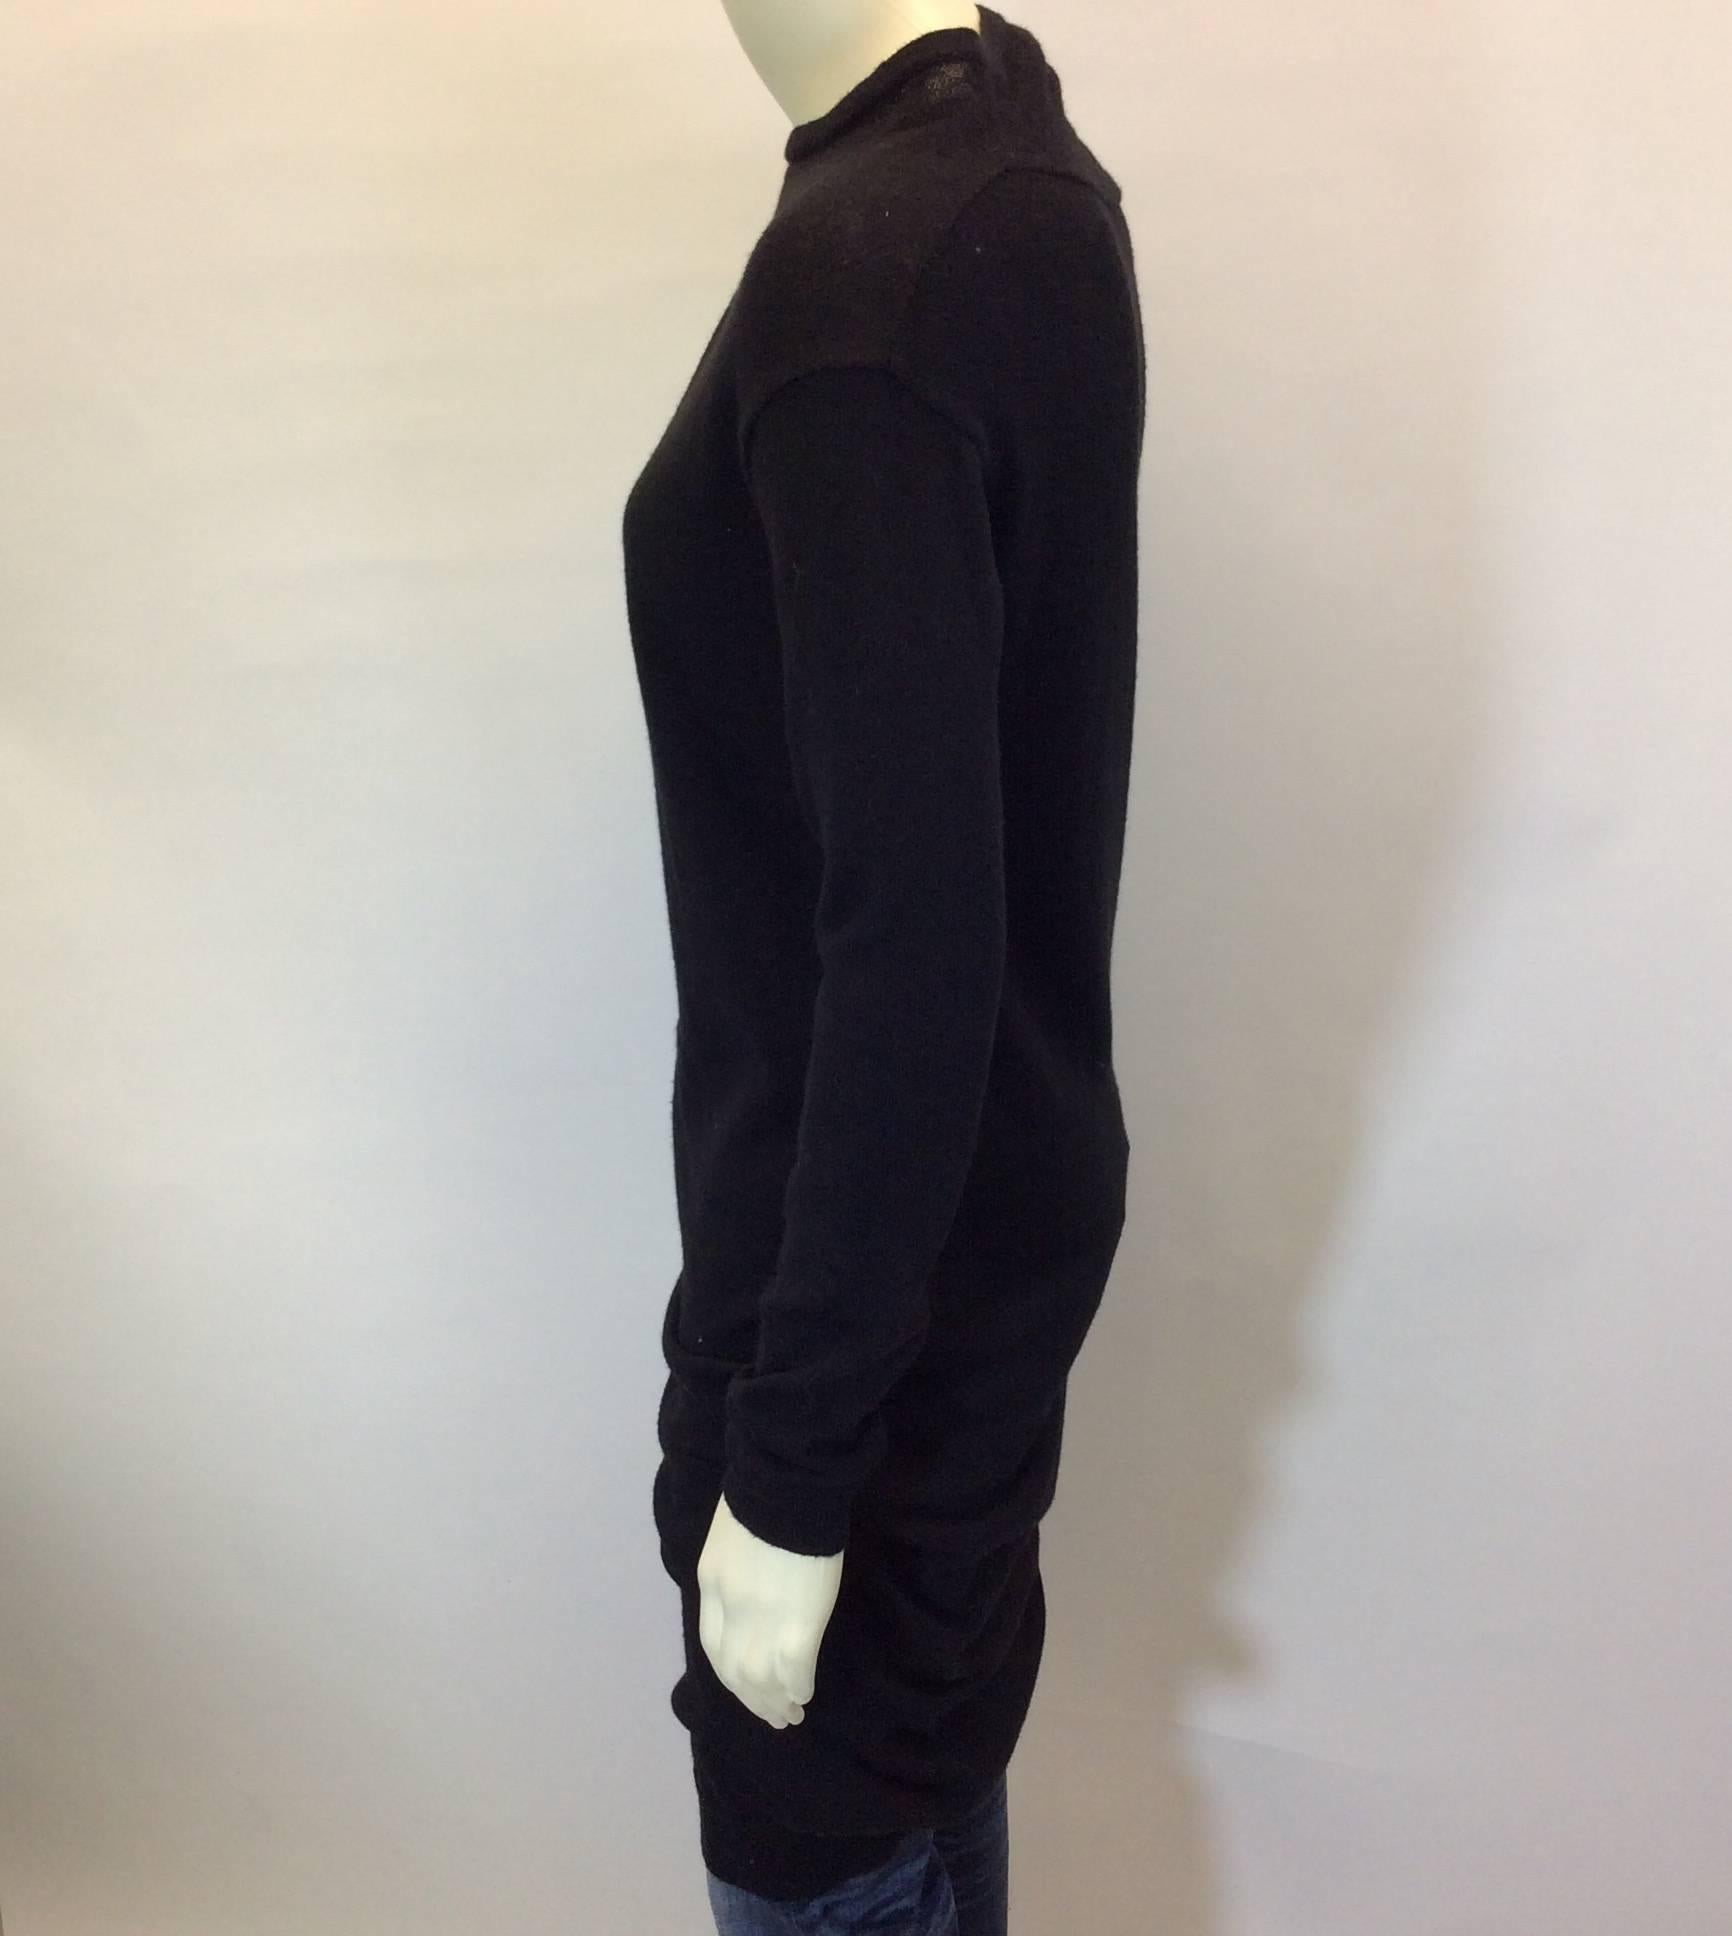 Black Rouched Sweater Dress
Rouching on right shoulder
Ribbed cuff and hem
Size Small
50% Polyester, 40% Alpaca, 10% Fleece Wool
